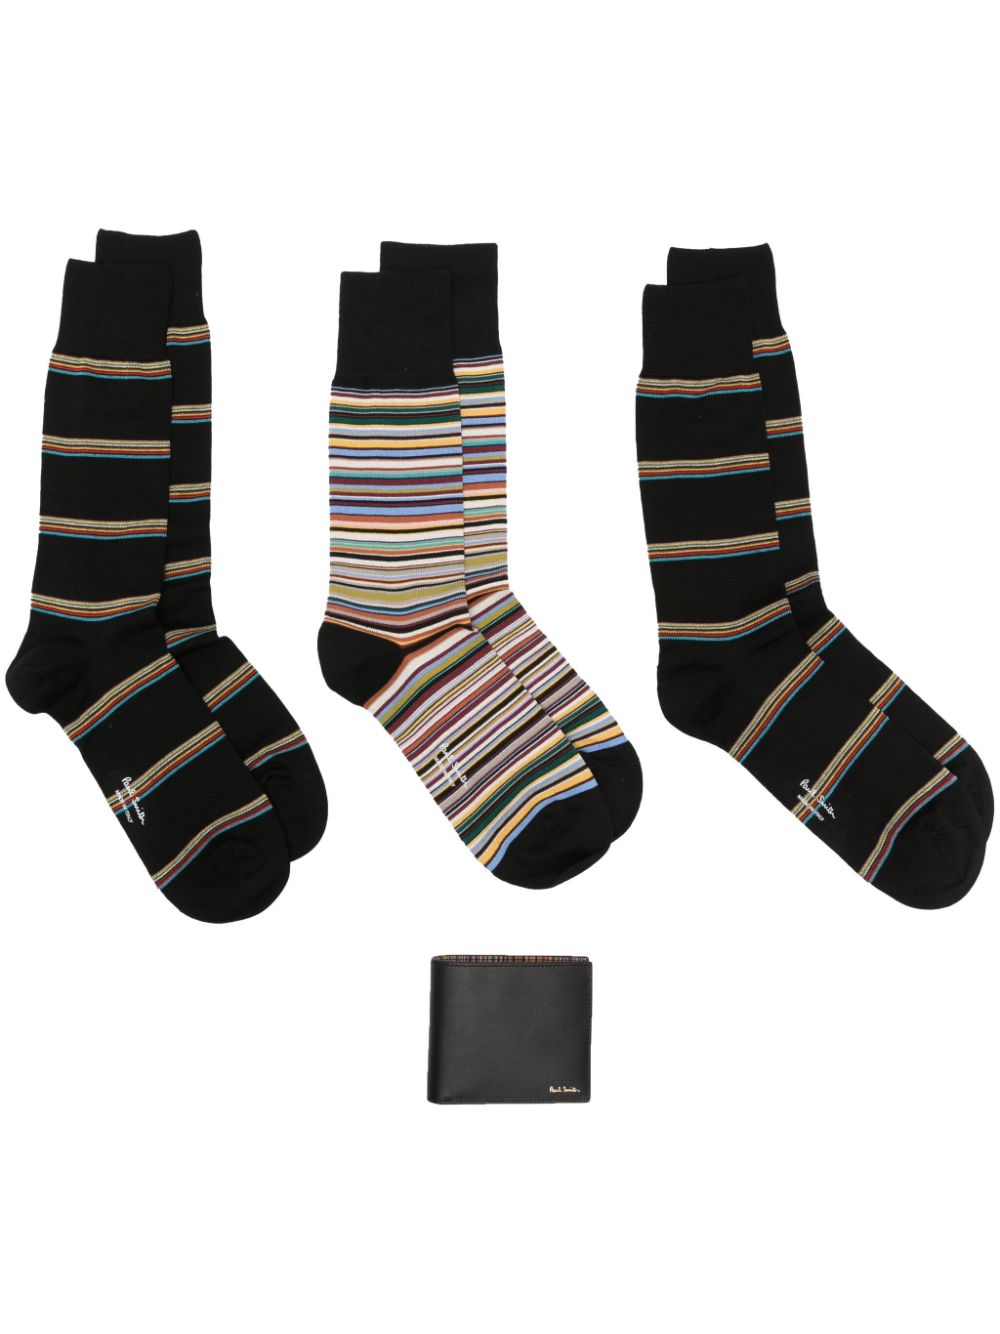 Paul Smith striped socks and wallet set (set of four) - Black von Paul Smith